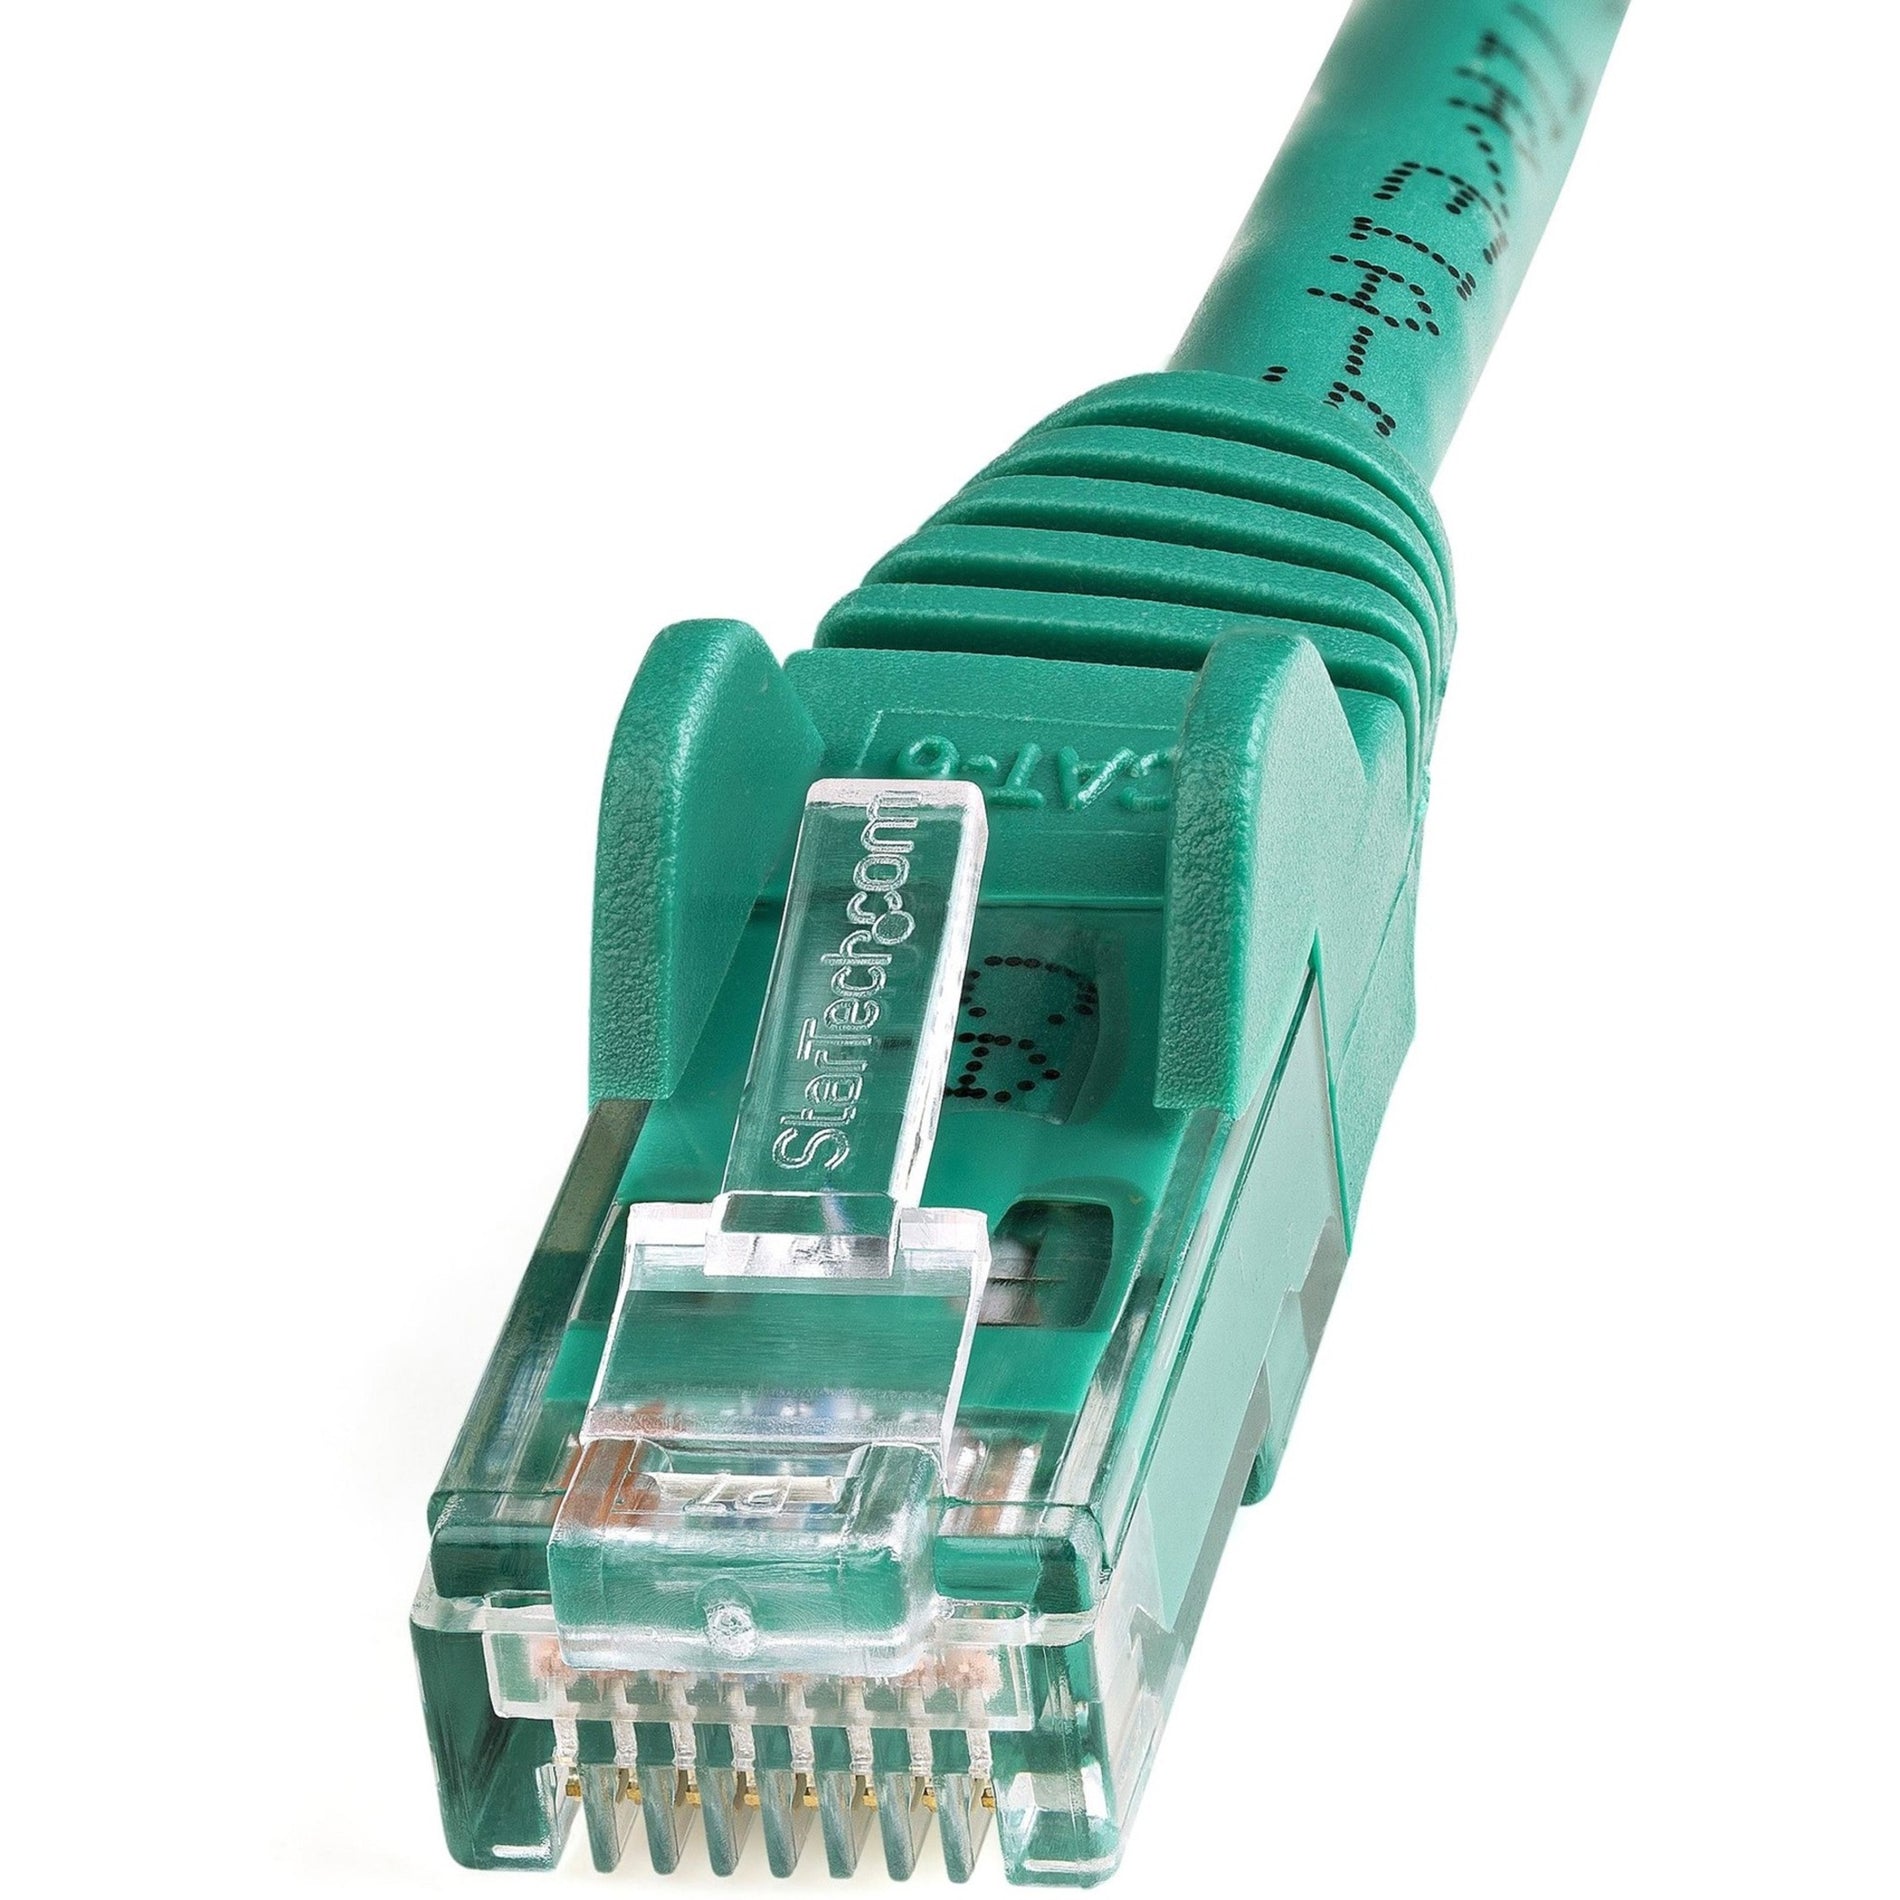 StarTech.com N6PATCH25GN 25 ft Green Snagless Cat6 UTP Patch Cable 10 Gbit/s Data Transfer Rate Lifetime Warranty  スターテック・ドットコム N6PATCH25GN 25フィート グリーン スナッグレス Cat6 UTP パッチケーブル 10ギガビット/秒 データ転送レート ライフタイム保証